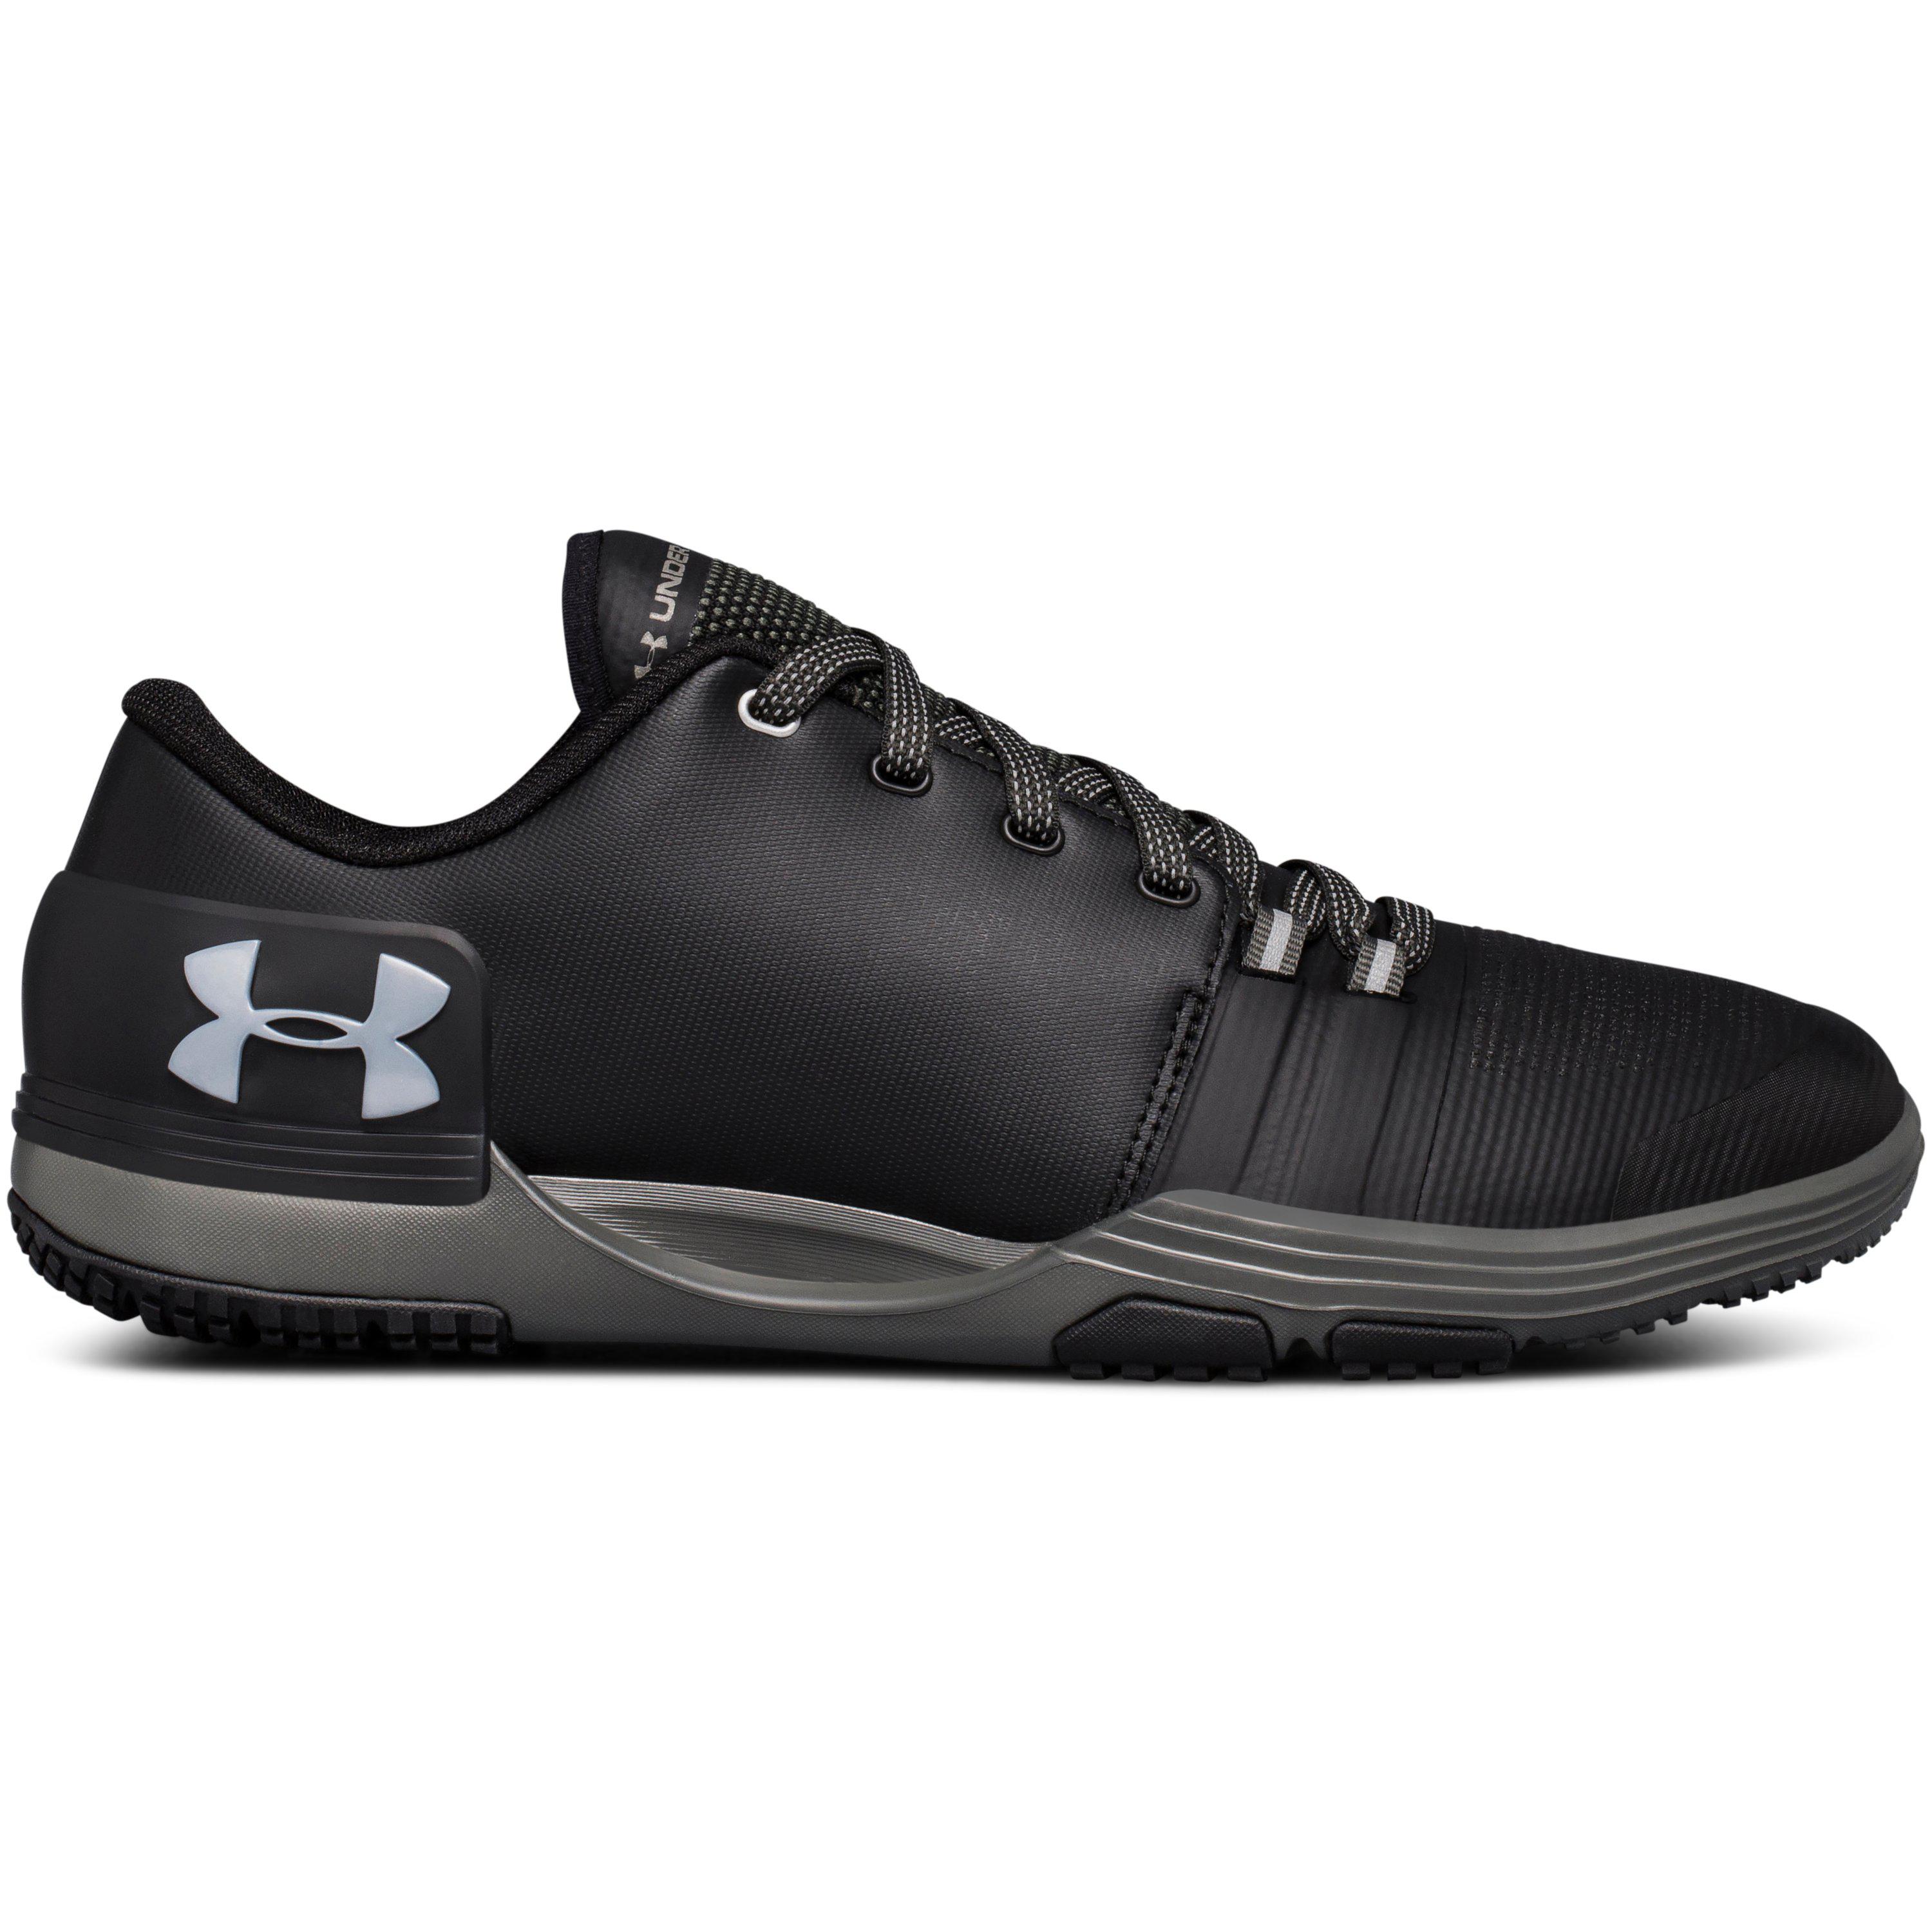 under armour limitless 3 training shoes mens,OFF 80%,www.concordehotels.com.tr